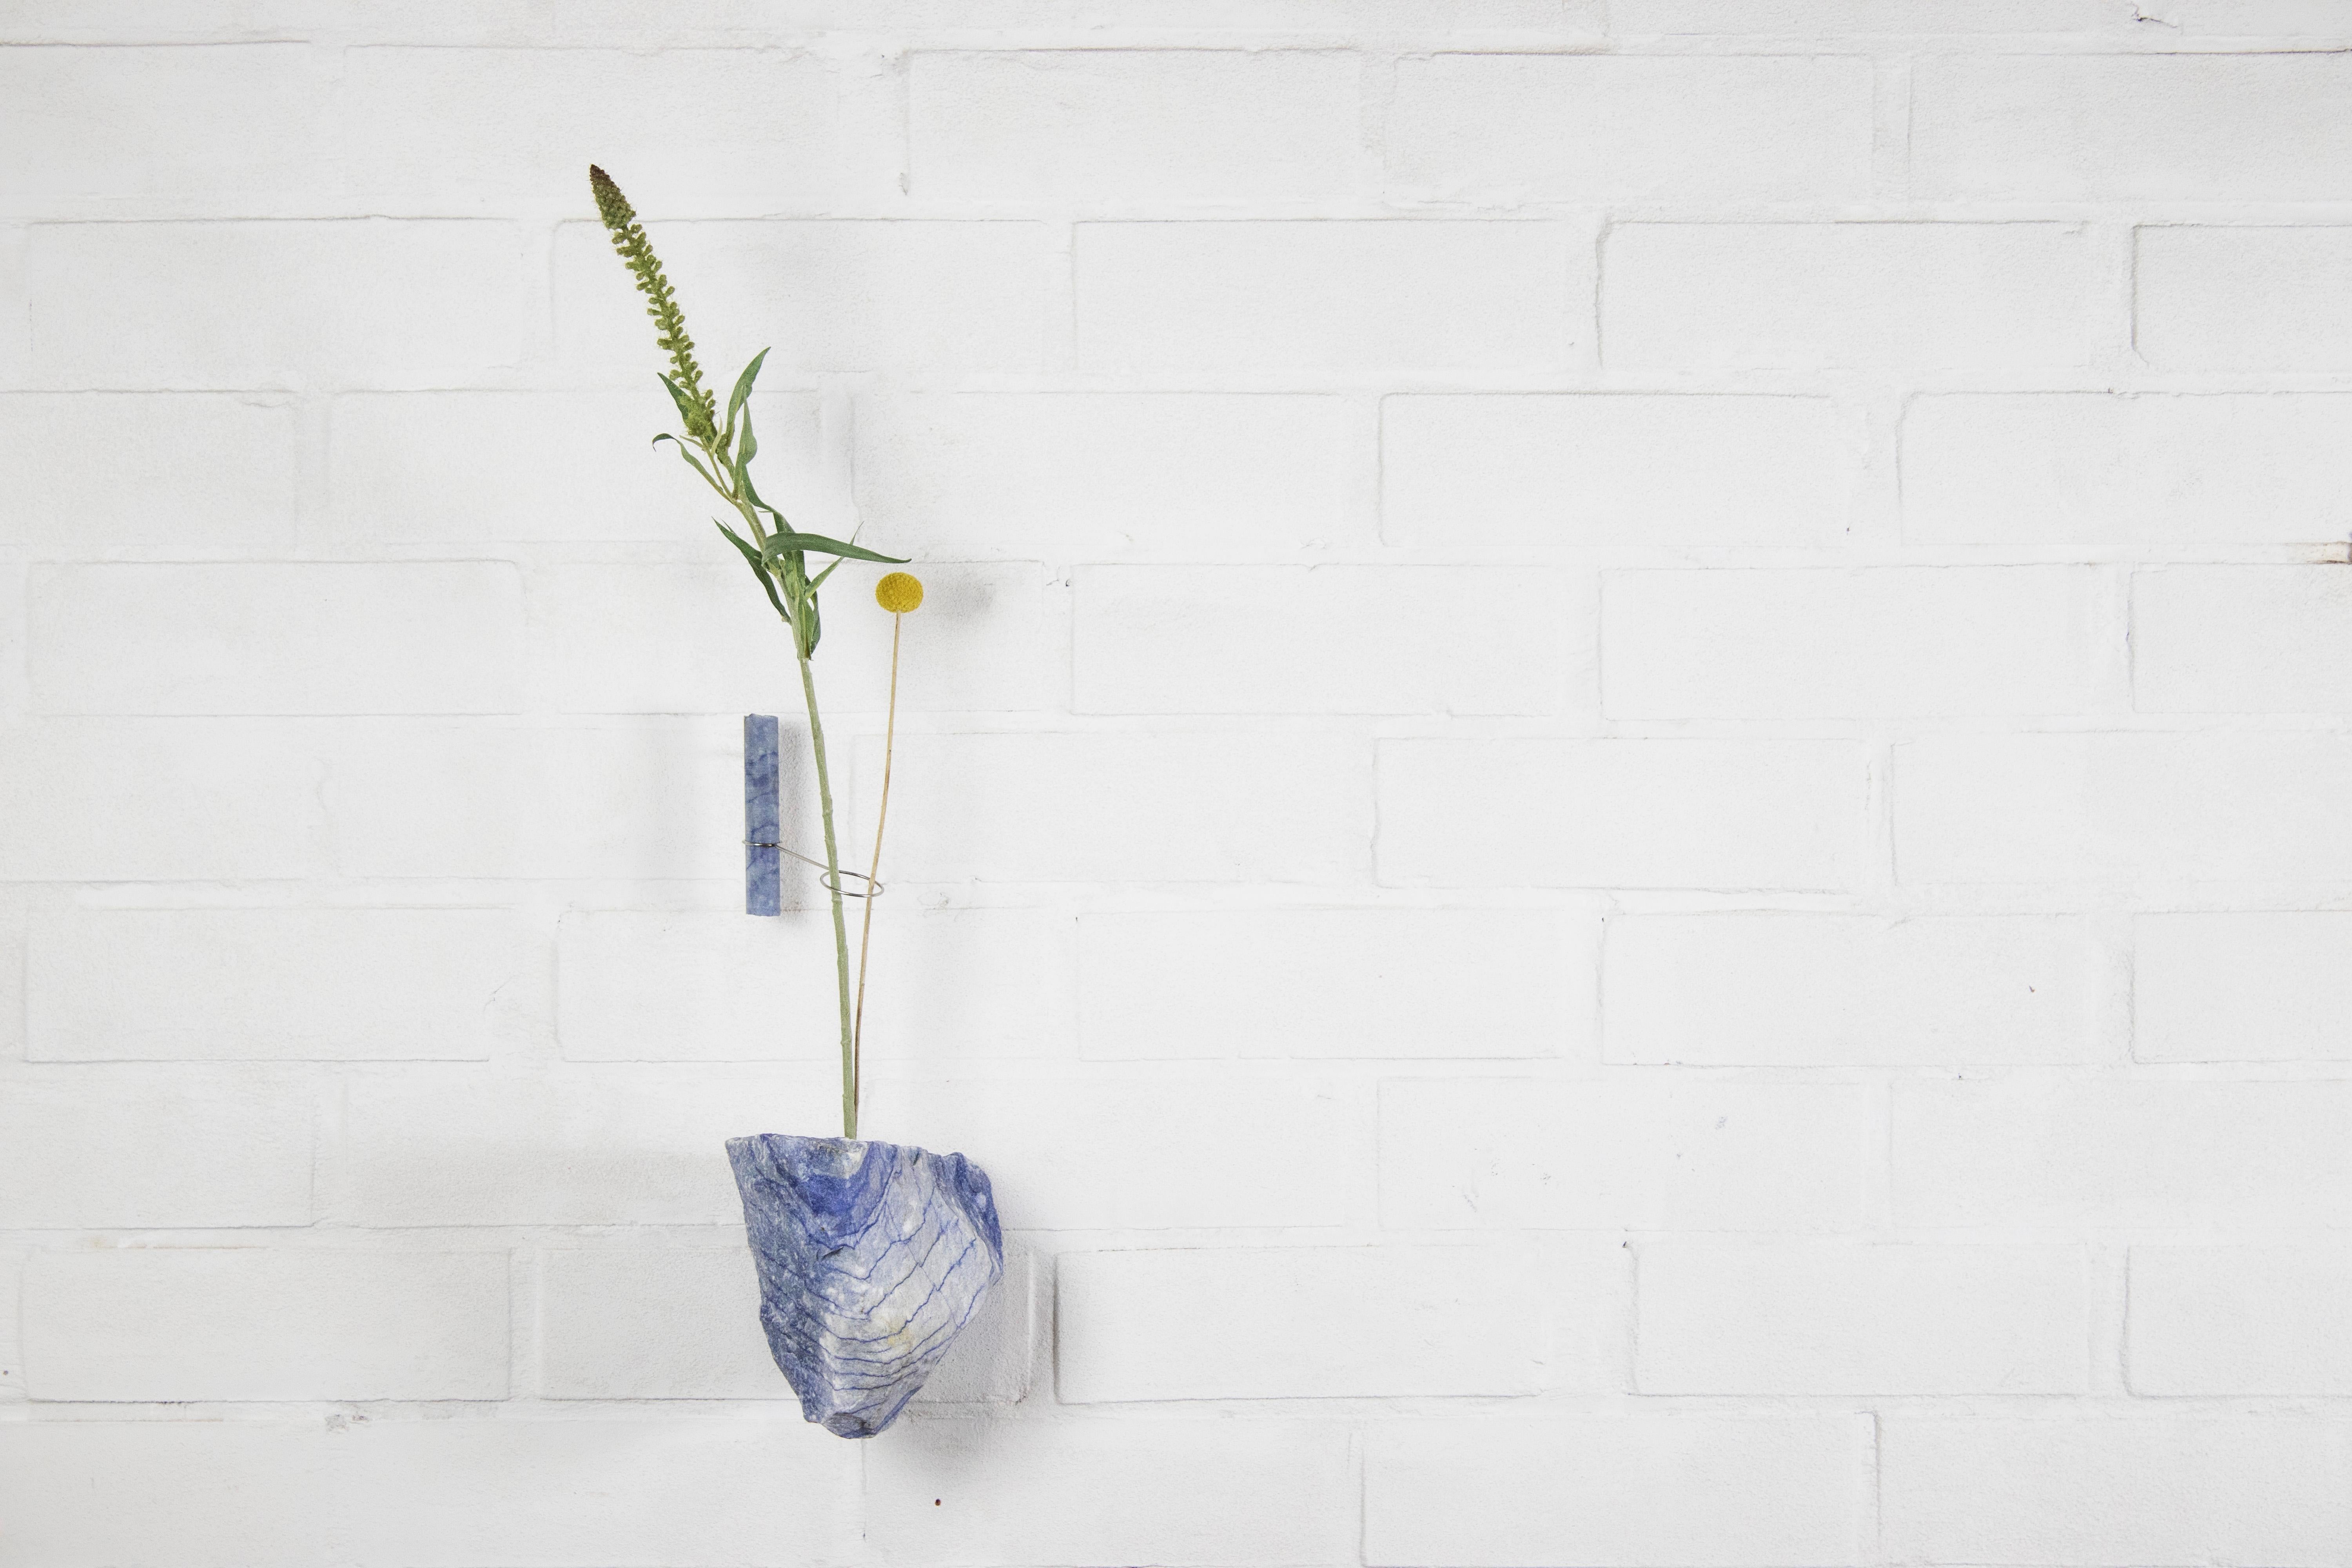 Blue Quartz Flower Wall Vessel by Studio DO
Dimensions: D 19 x W 16 x H 18 cm
Materials: Blue Quartz, stainless steel.

Flowers are intrinsically connected with composition and earth.
Influenced by varied vessels from past to present such as the